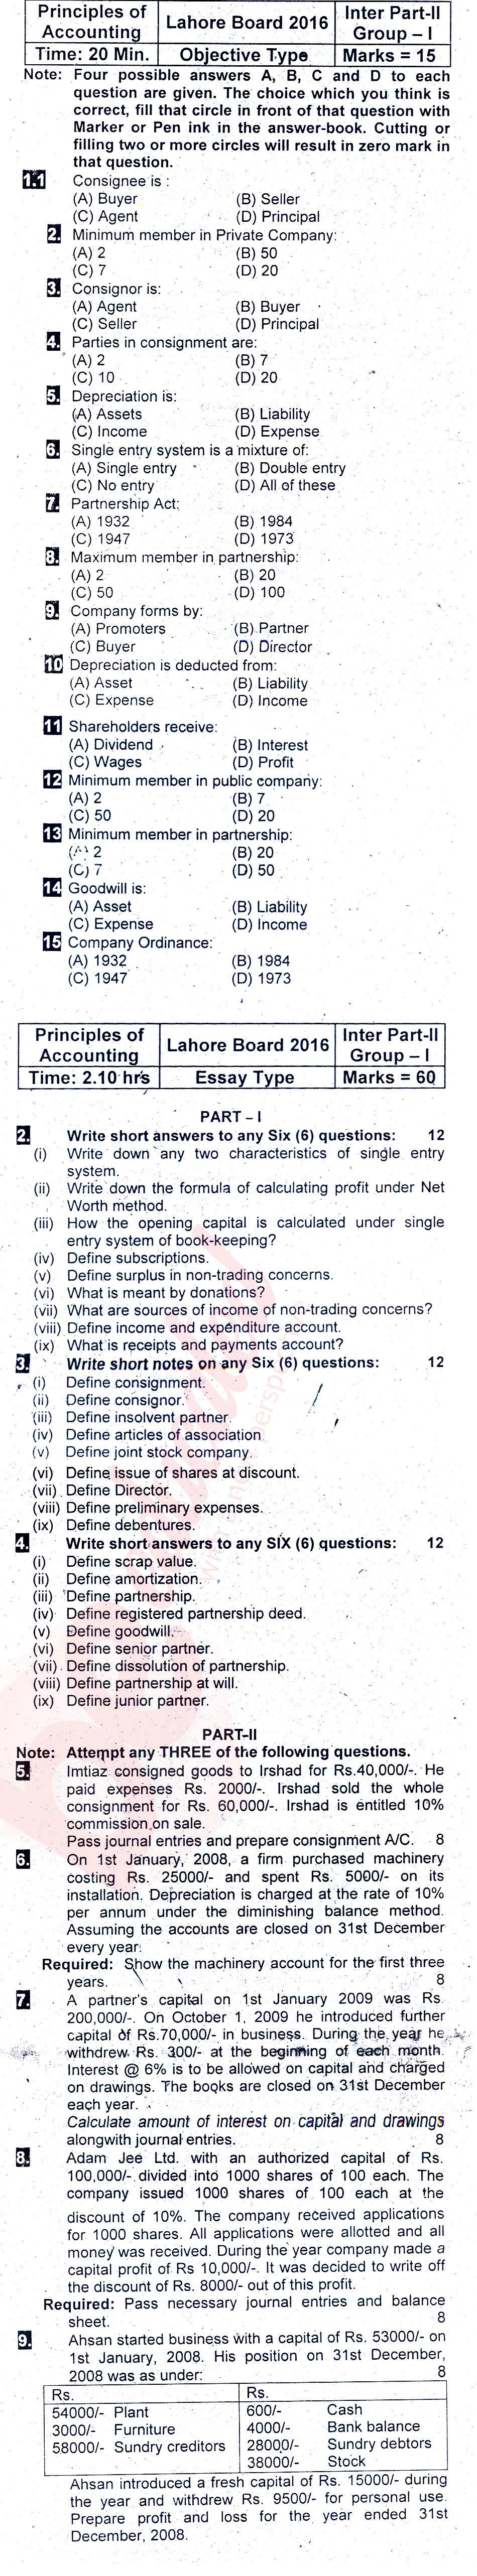 Principles of Accounting ICOM Part 2 Past Paper Group 1 BISE Lahore 2016